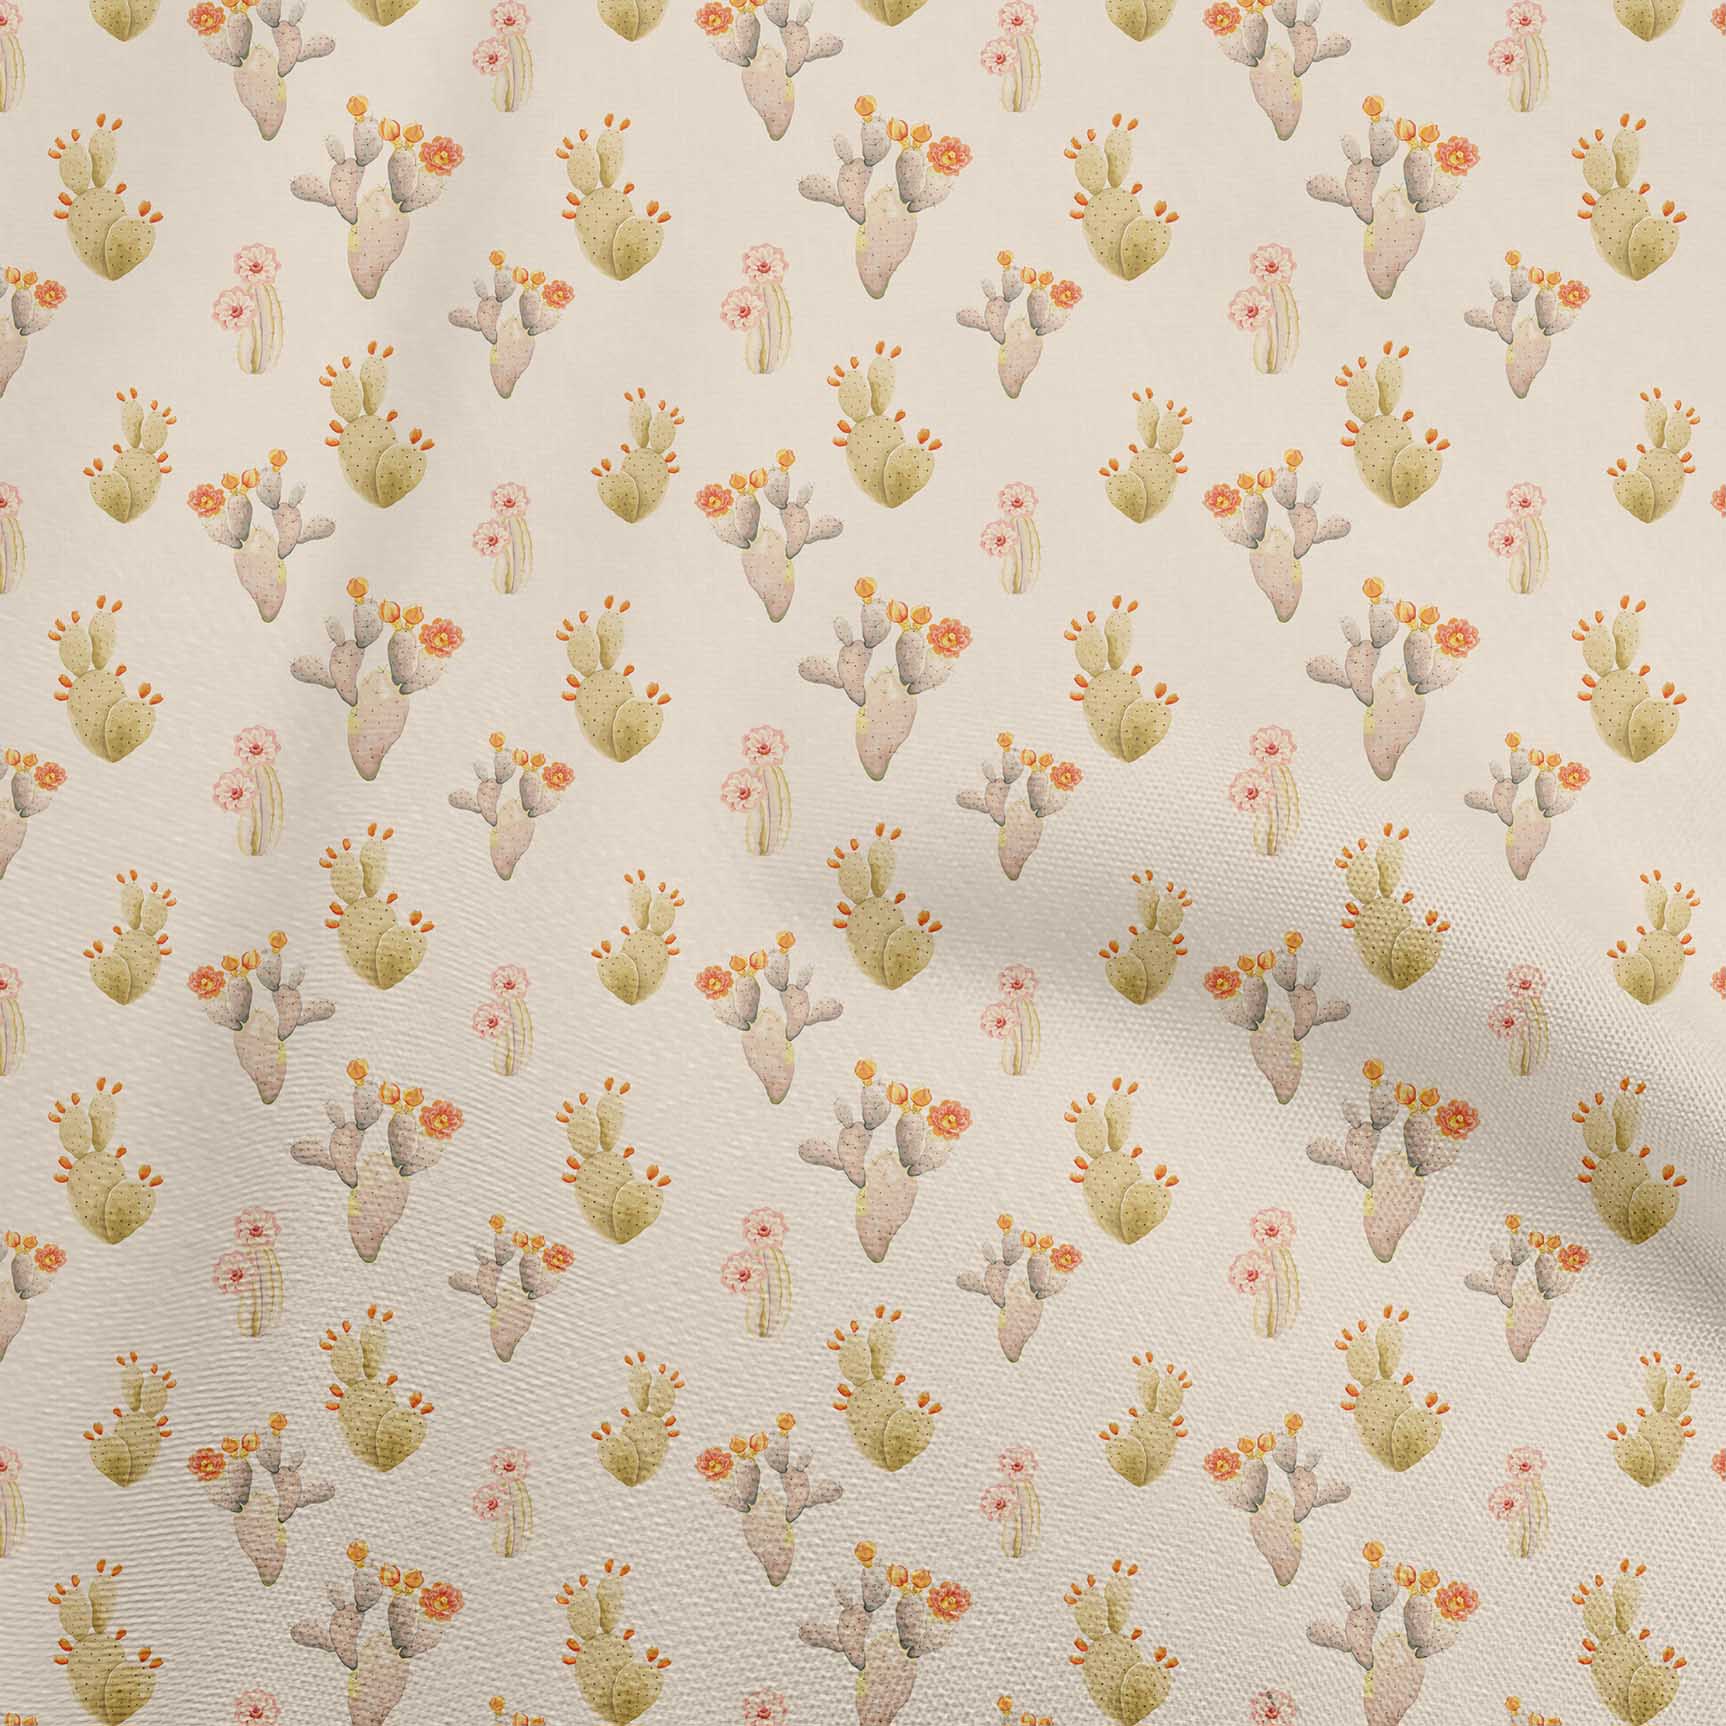 One PCS Cotton Fabric Pre-Cut Cotton cloth Fabric for Sewing Cactus D33 